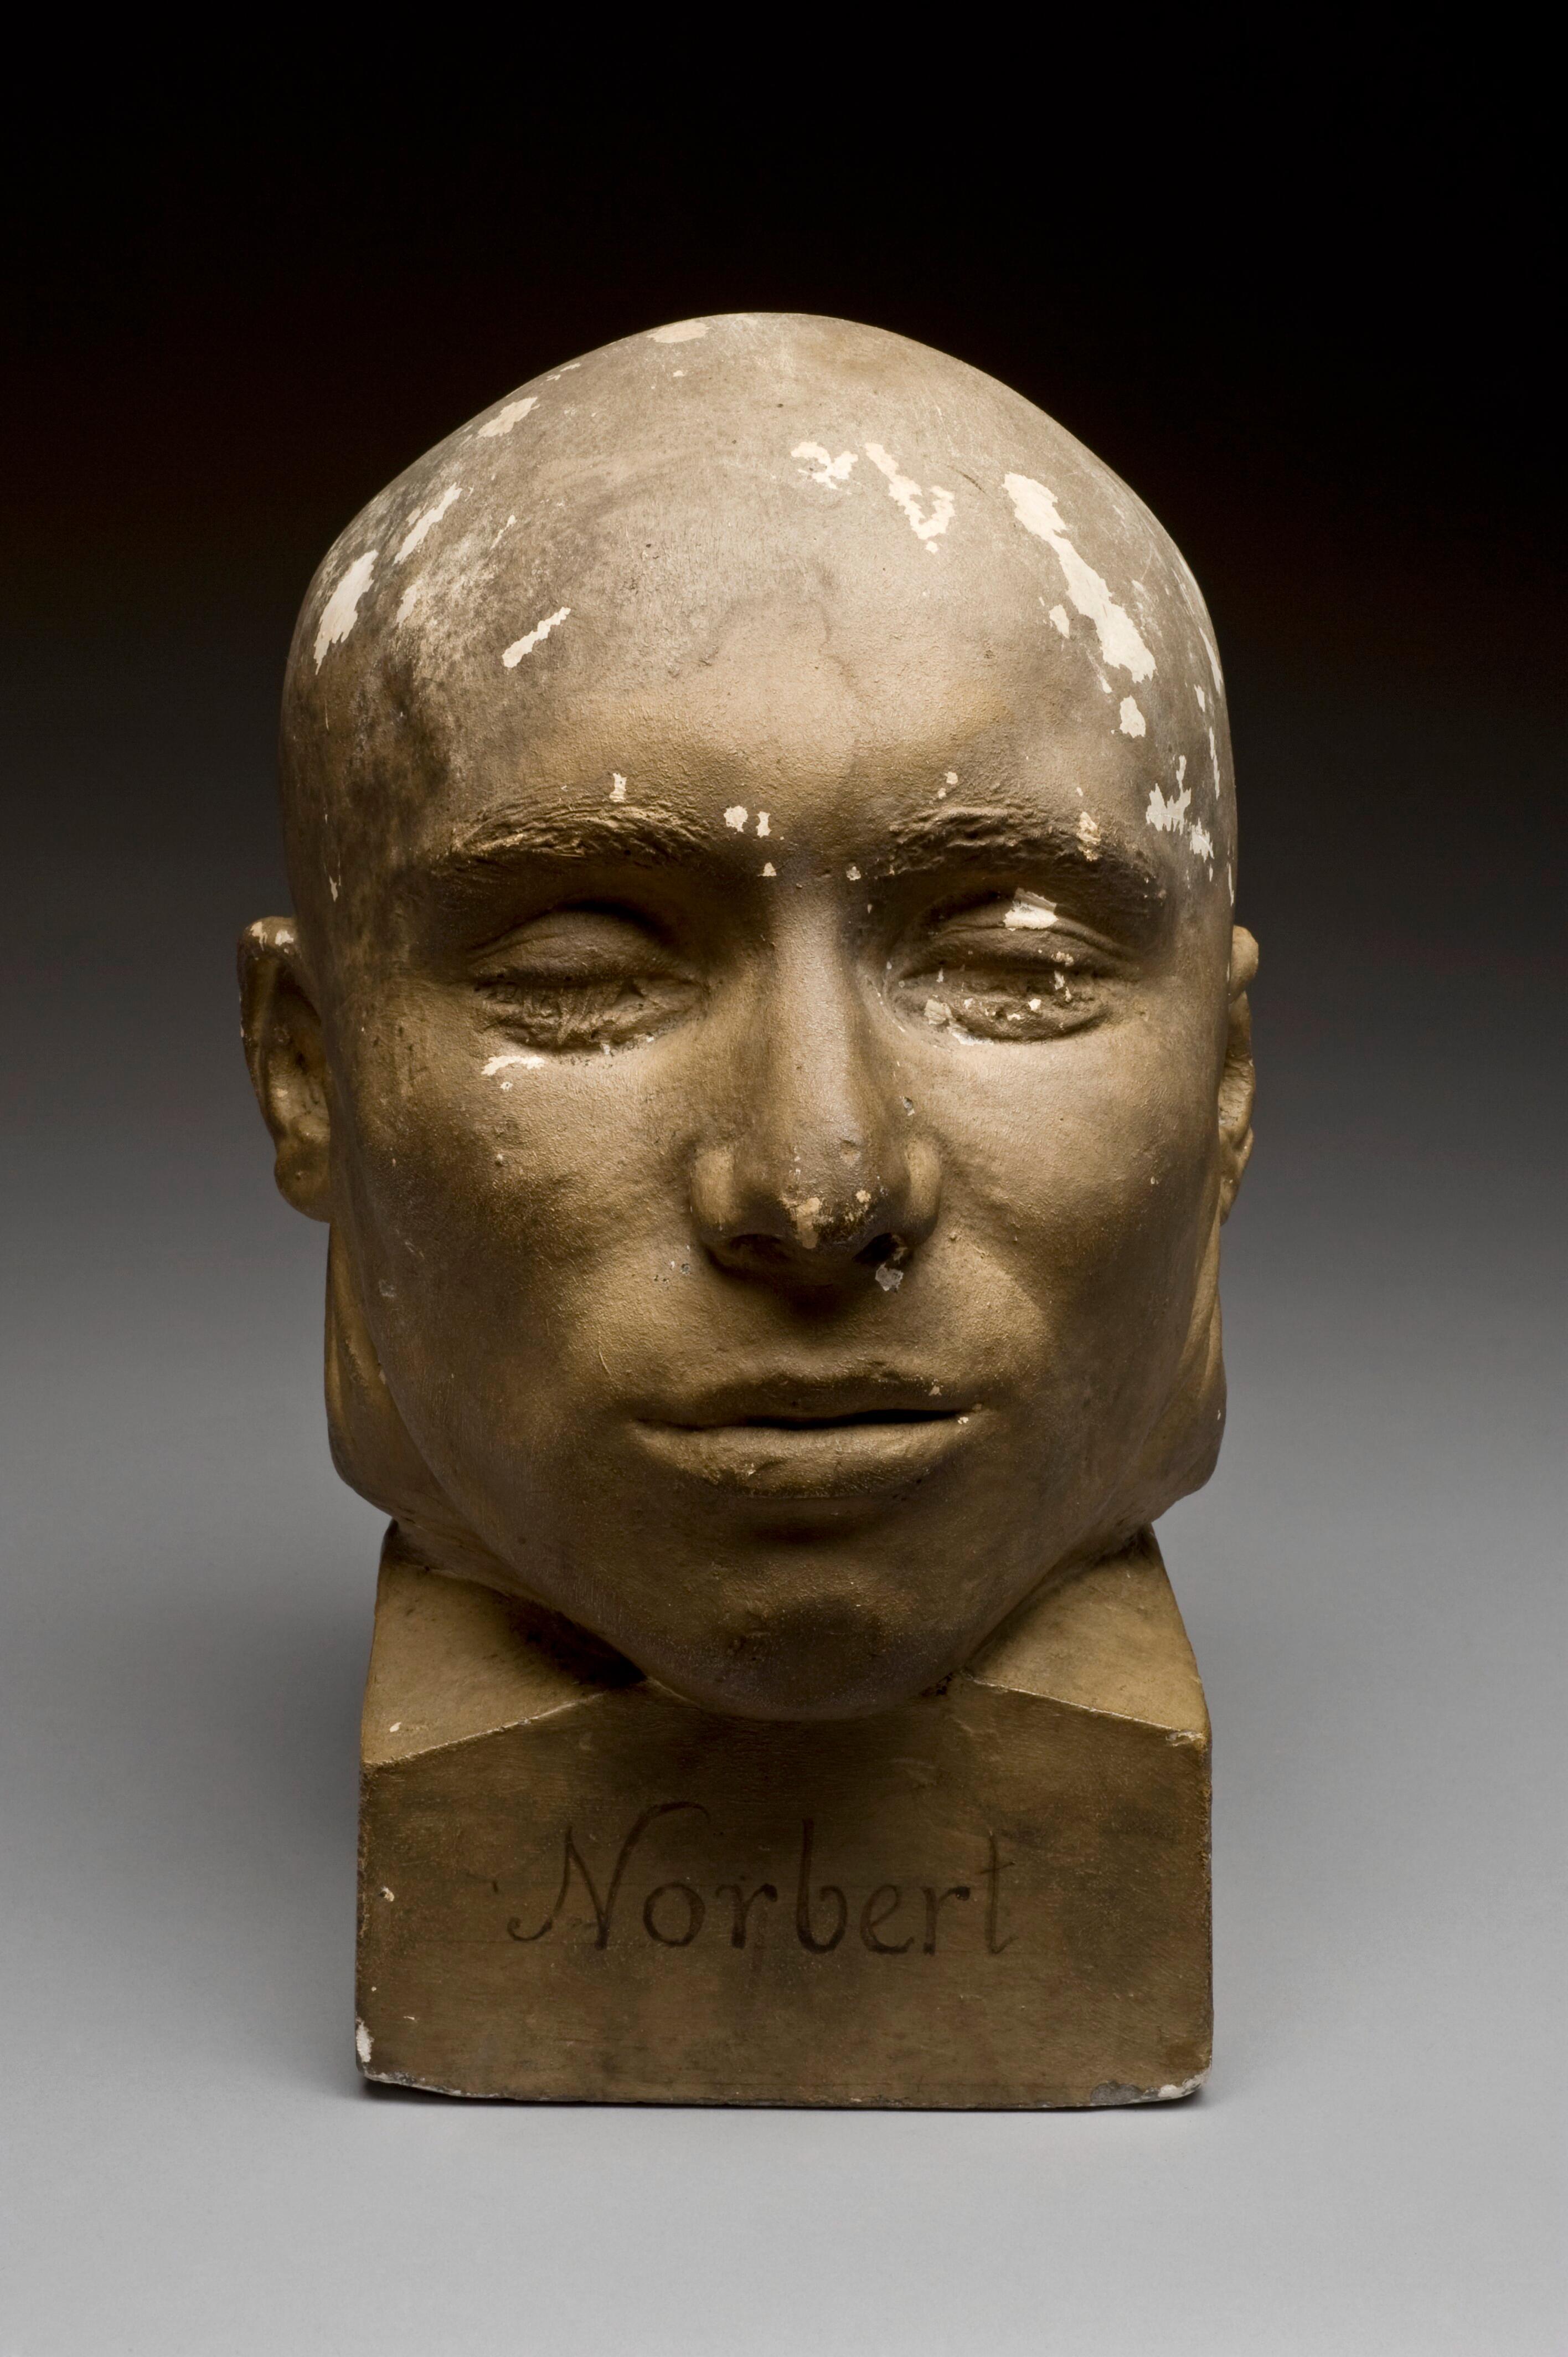 During the 1800s, plaster heads of executed criminals were used for an emerging field of study called phrenology. Phrenologists believed the shape and size of areas of the brain (and therefore the overlying skull) determined personality. This meant criminals such as Norbert made interesting subjects. Heads like this were part of larger phrenological reference sets which included famous people and ethnographic examples. This example belonged to Dr. Paul-Ferdinand Gachet (1777-1850). He is best known for treating painter Vincent van Gogh in the last weeks of his life. Gachet was the subject of one of van Gogh’s most famous paintings. maker: Unknown maker Place made: France